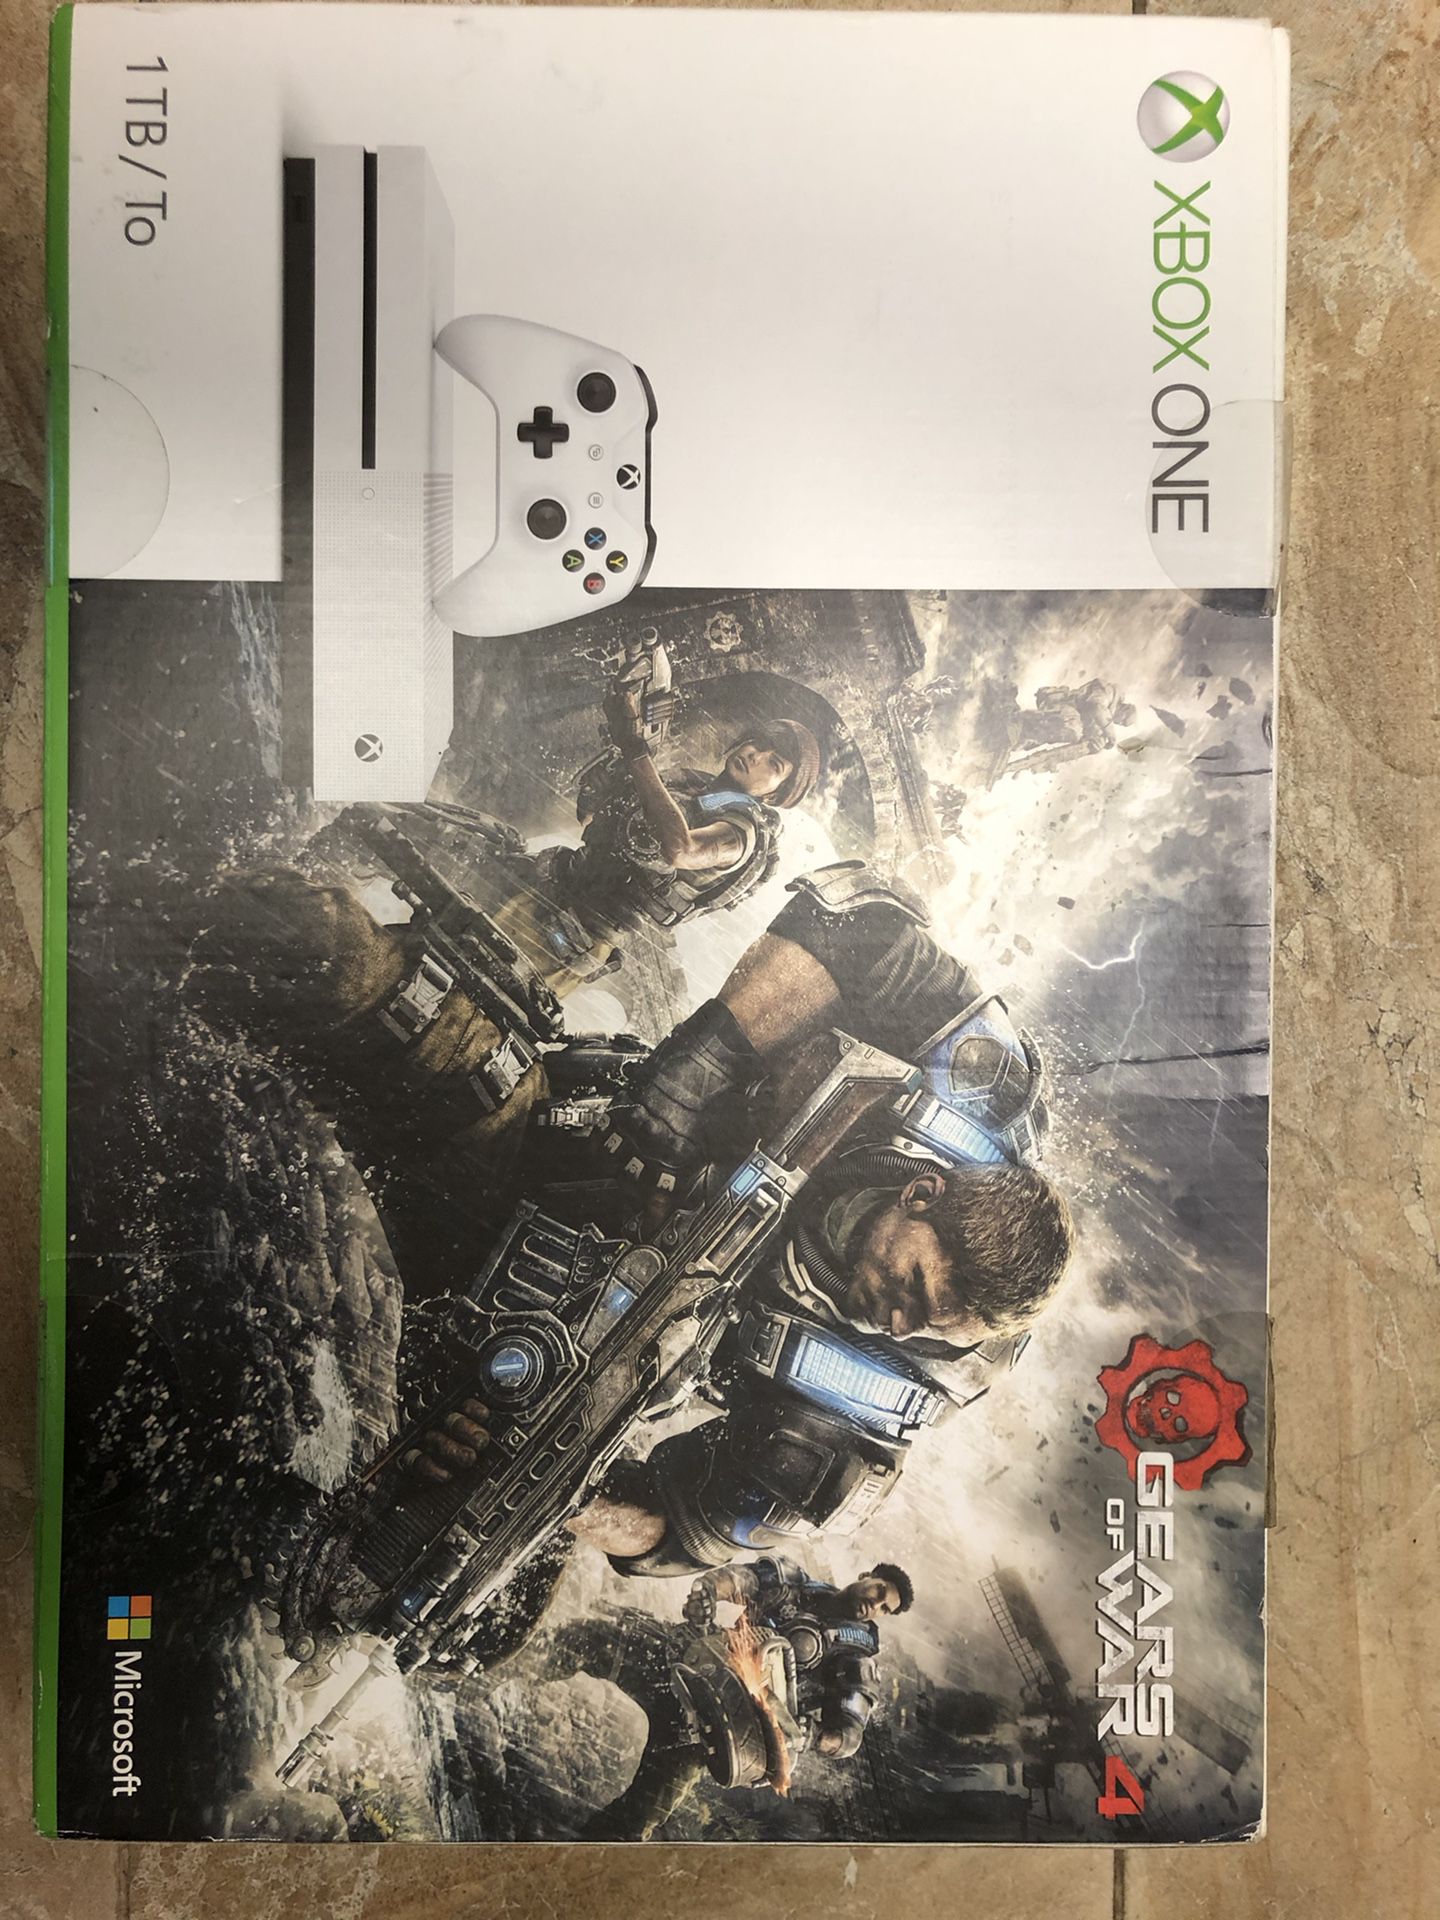 Xbox One S 1TB Gears of War 4 Edition